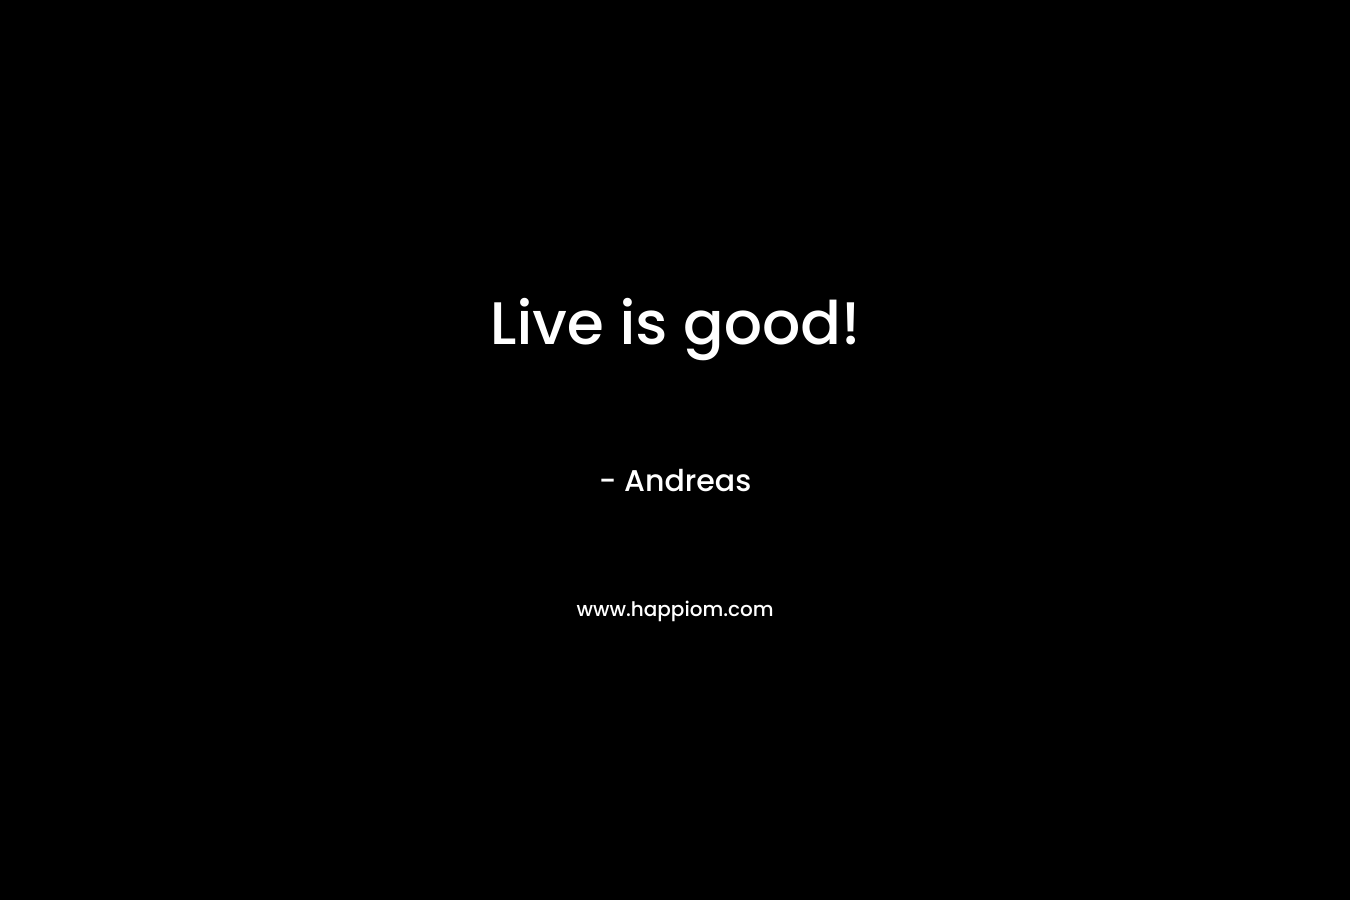 Live is good!